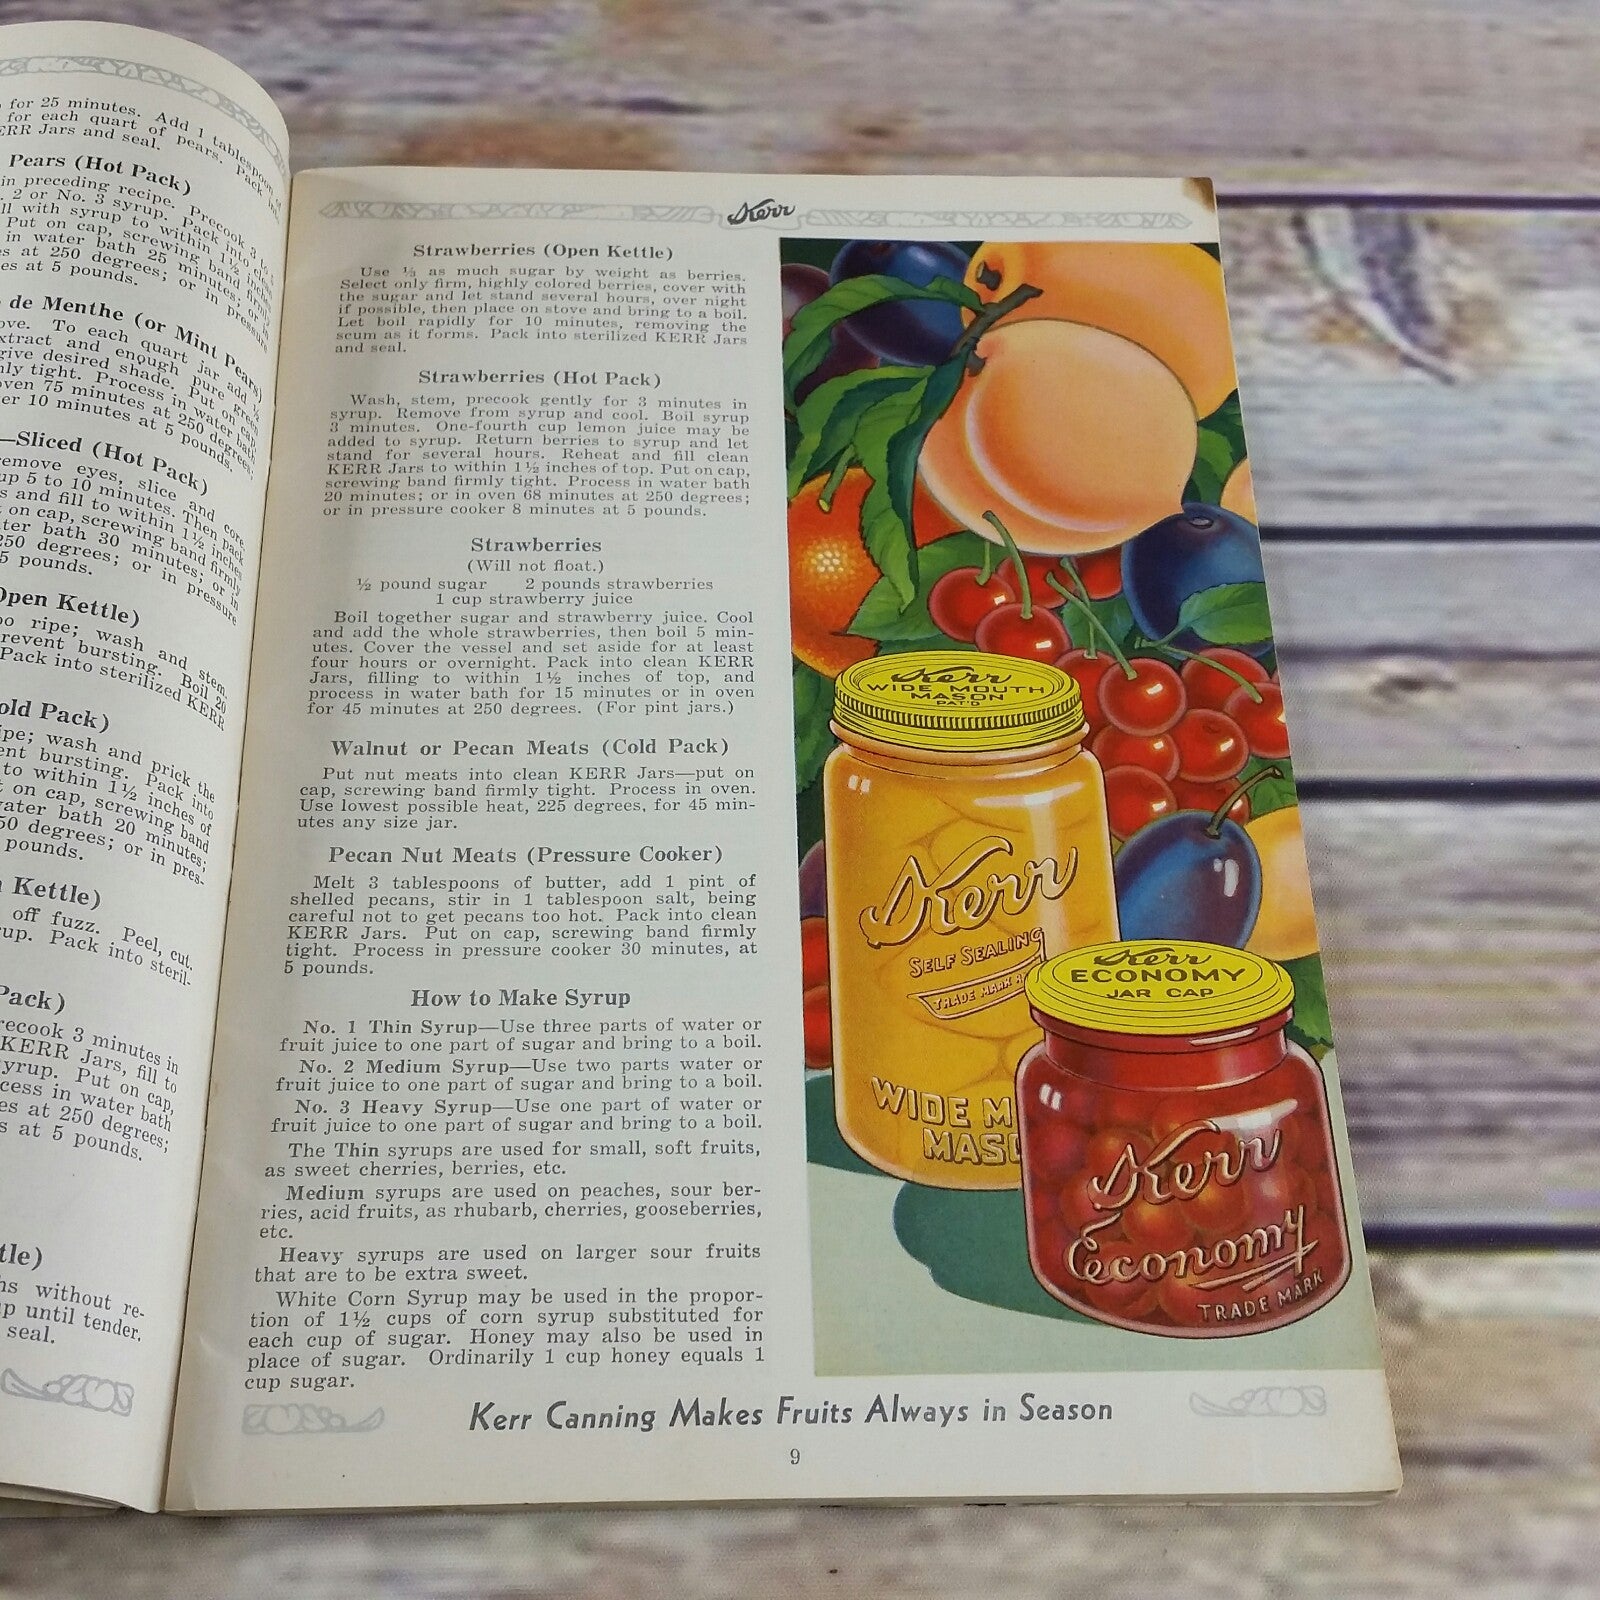 Vintage Kerr Home Canning Book Cookbook Recipes 1937 Booklet Yellow Black Cover Canning Tips Food Preservation - At Grandma's Table